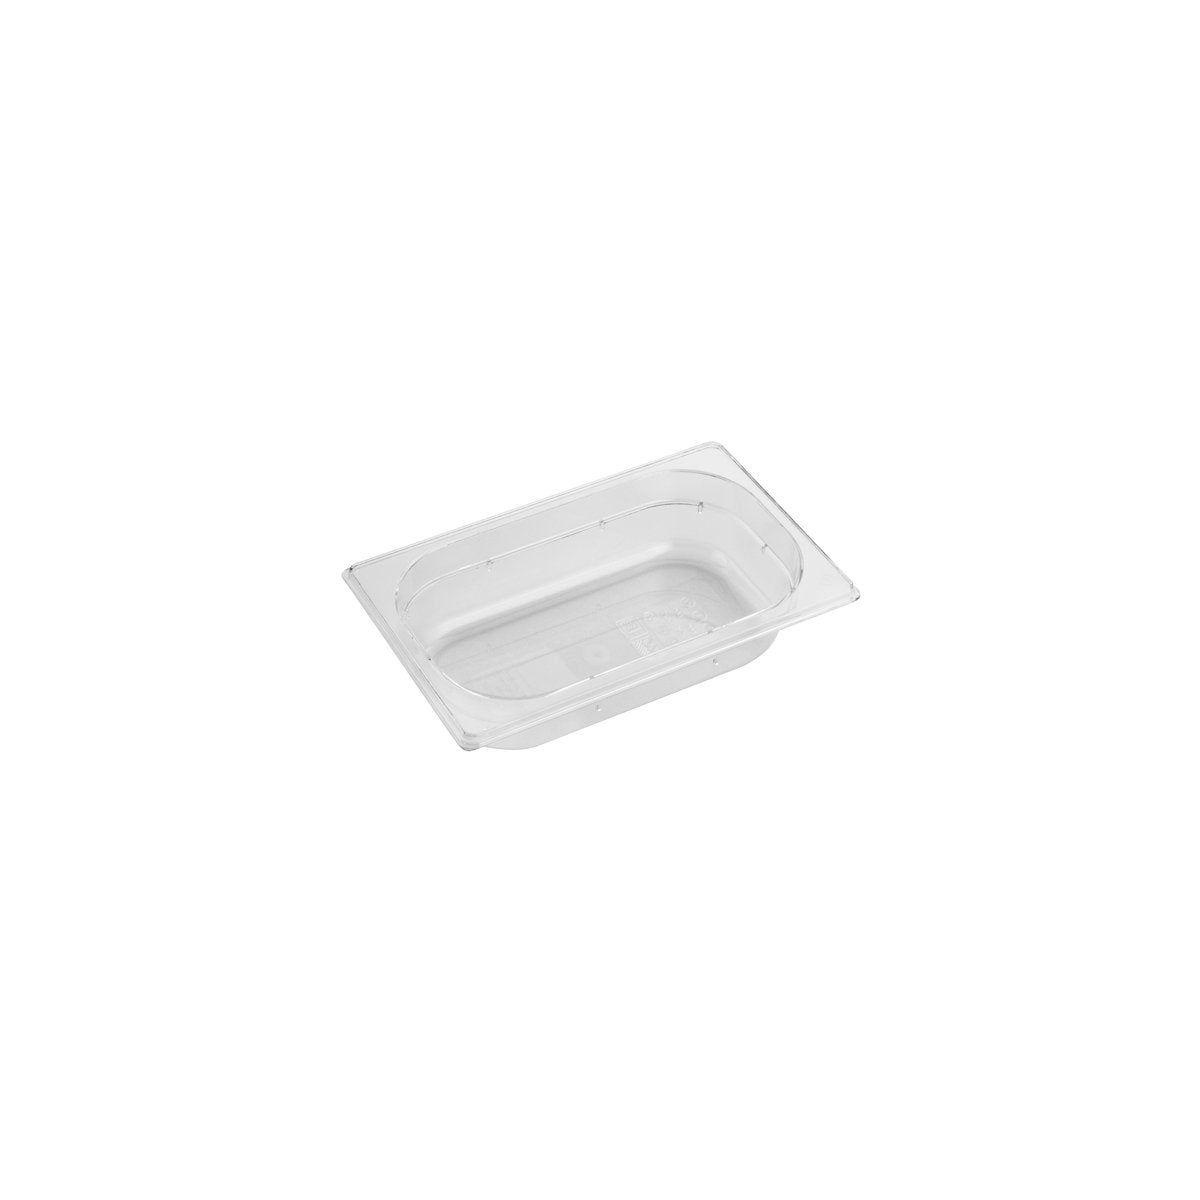 PC-14065CL Inox Macel Gastronorm Pan Polycarbonate Clear 1/4 Size 65mm Tomkin Australia Hospitality Supplies